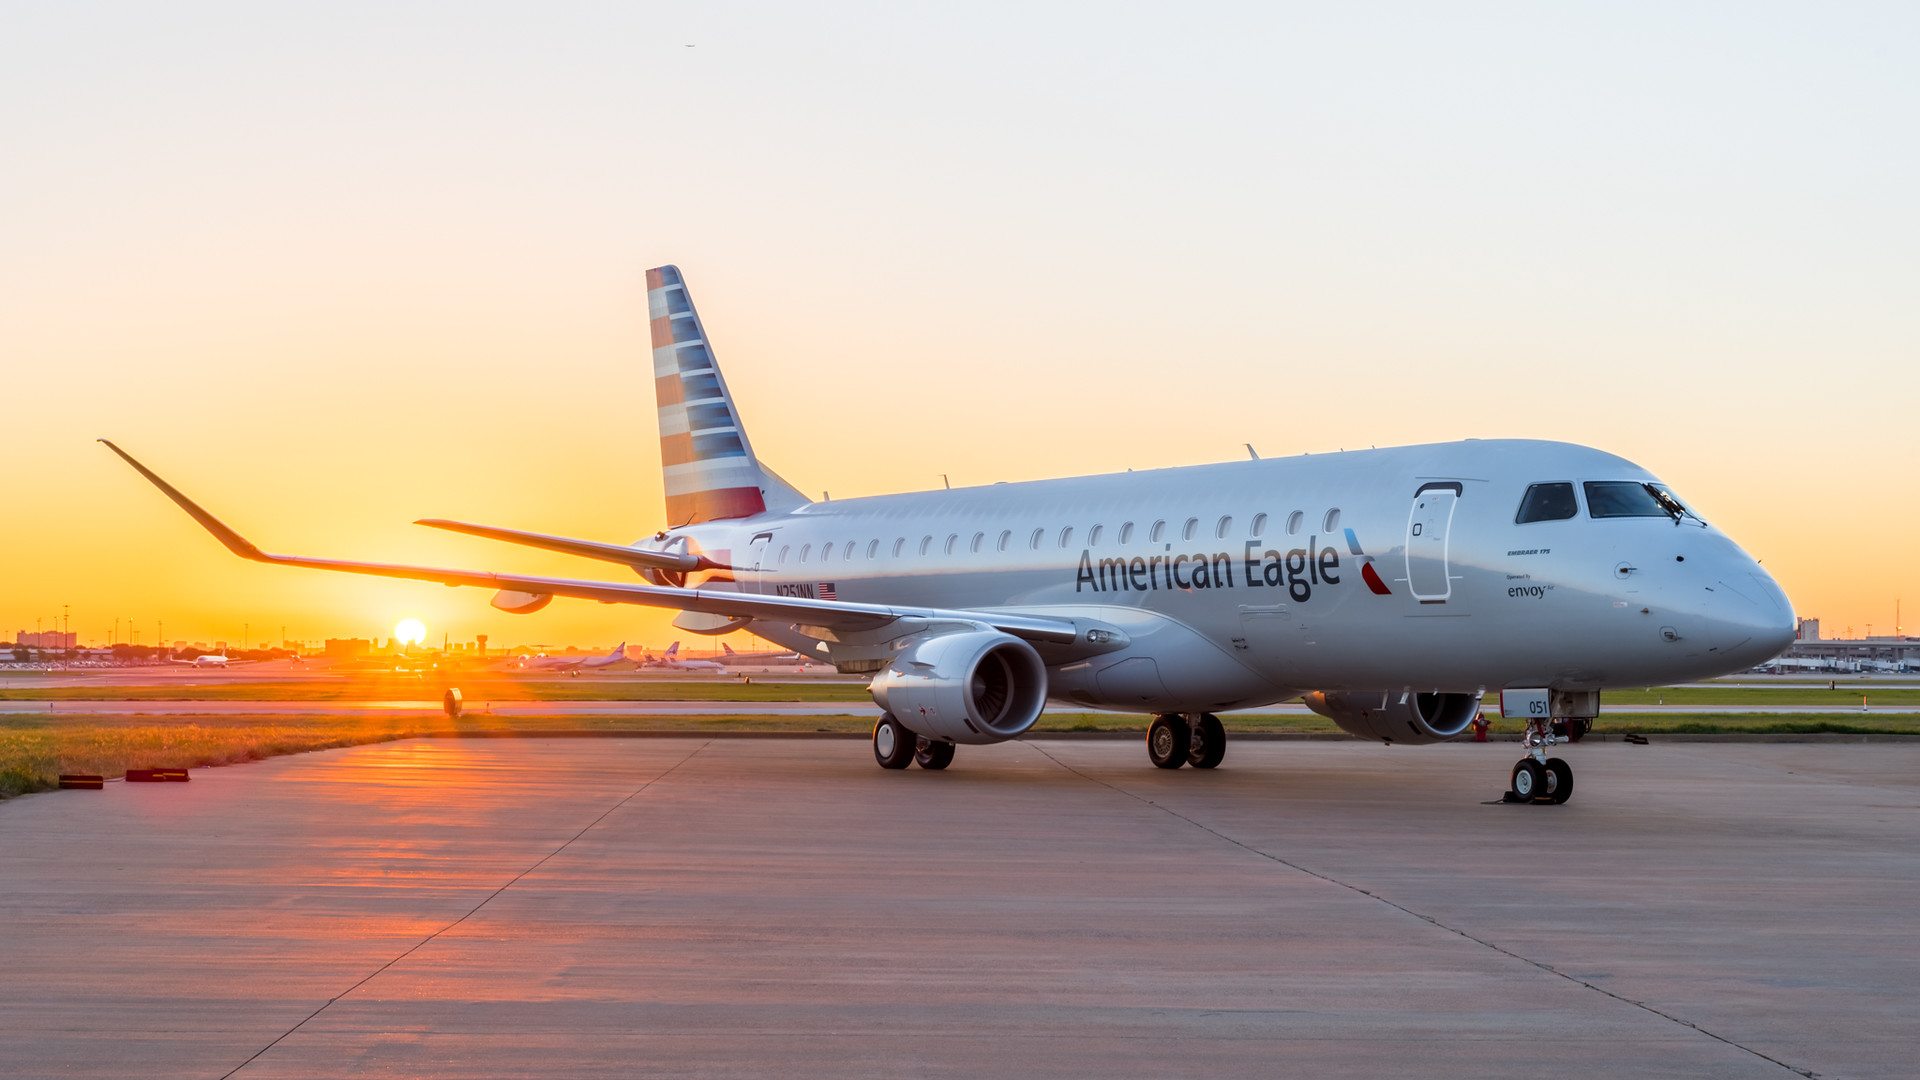 An American Airlines Embraer 175 aircraft sits on the tarmac in front of a beautiful orange sun rise